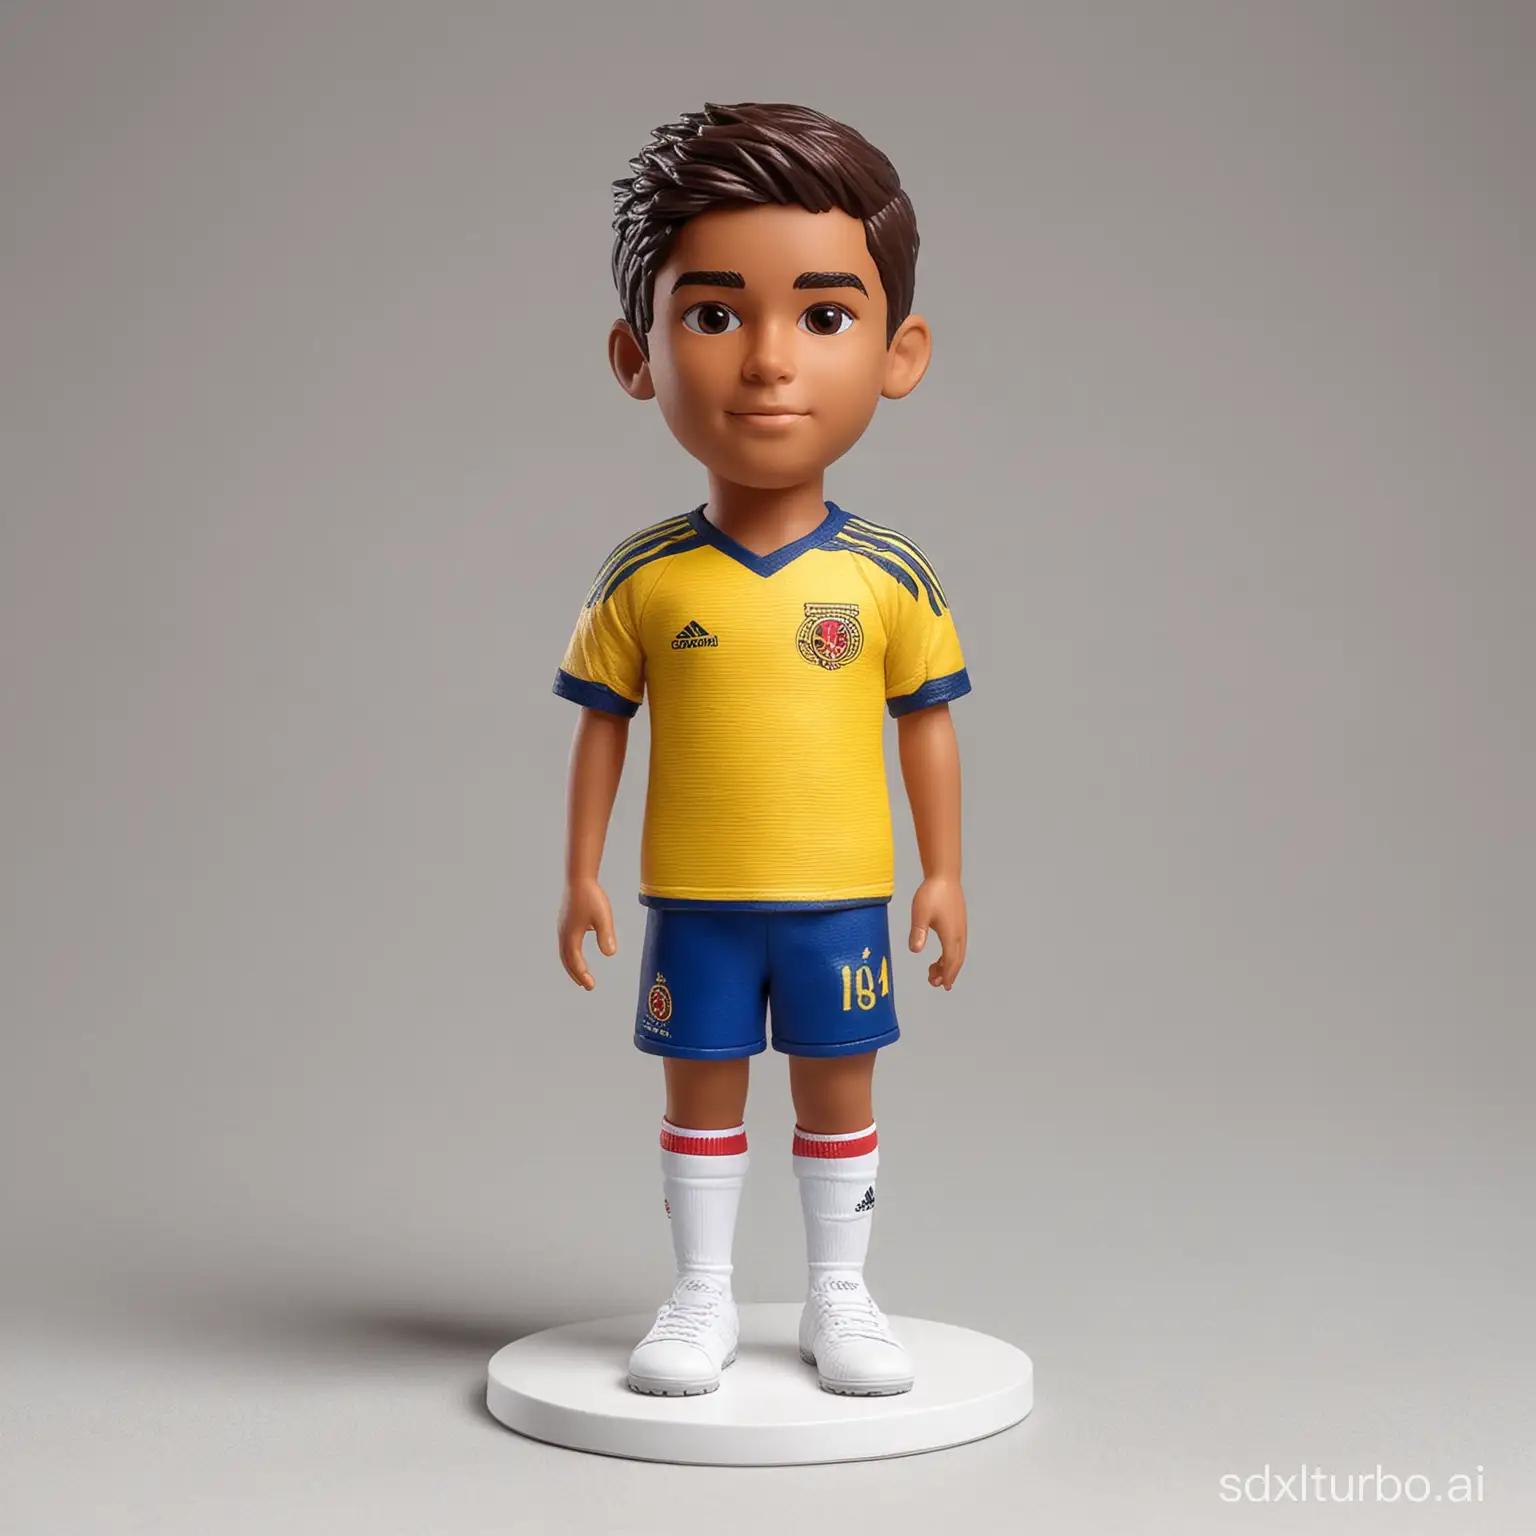 You can create a display with a boy wearing a football shirt from Colombia